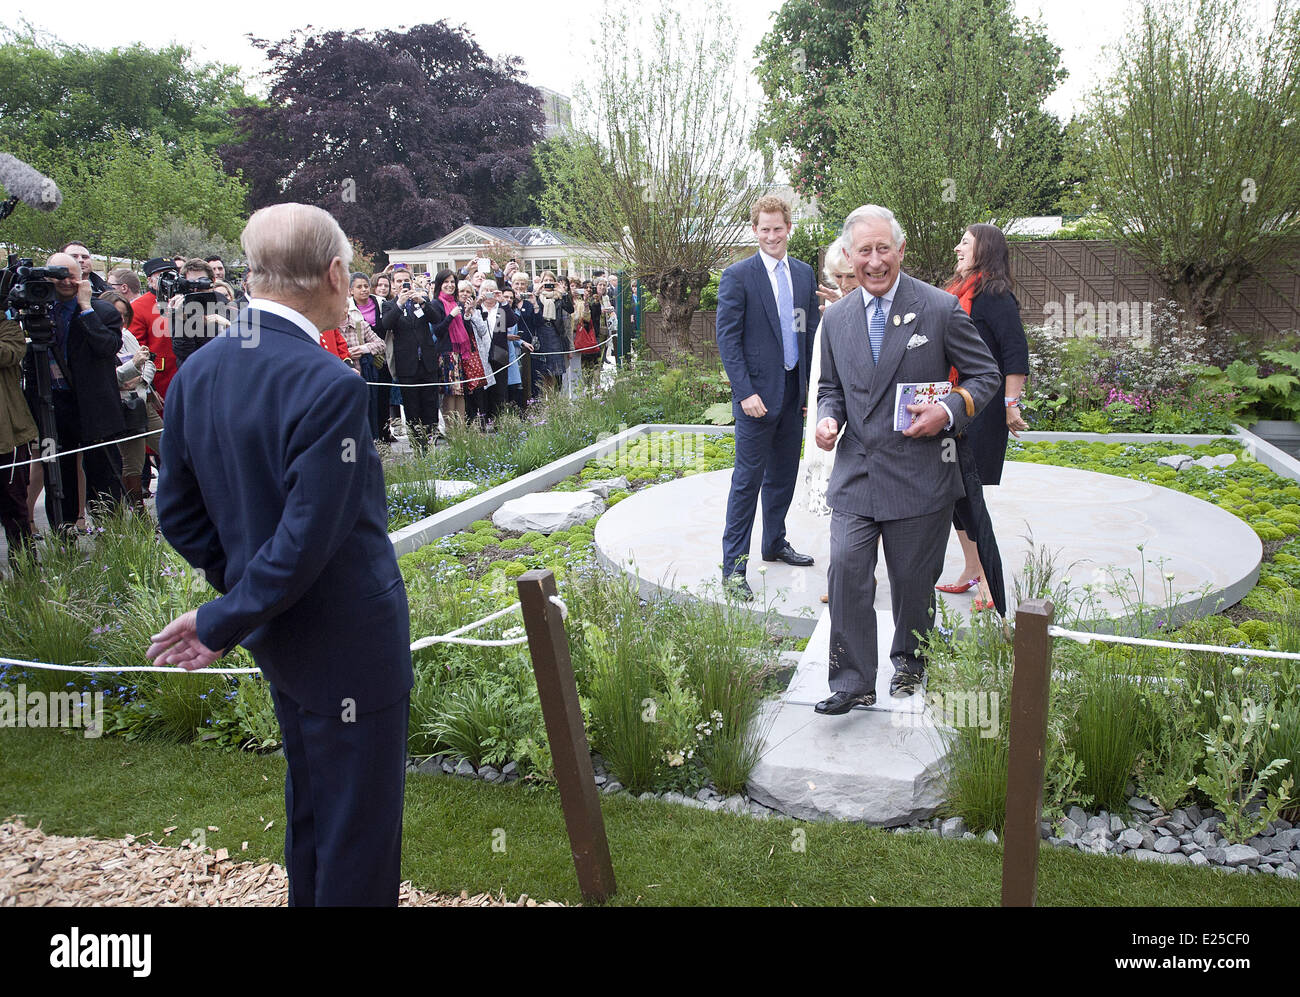 LONDON - UK - 20 MAY 2013: ROTA: Chelsea Flower Show 2013. Members of the Royal Family join HM Queen Elizabeth for a walk around the annual Chelsea Flower Show.  Prince Harry show his garden to his father Prince Charles Royal Rota photograph by Geoff Pugh/Supplied by Ian Jones Photography. NO Uk Sales for 28 days until 18-6-2013  Featuring: Charles,Prince of Wales,Prince Charles,Prince Harry,Prince Philip,Duke of Edinburgh Where: London, United Kingdom When: 20 May 2013 Stock Photo